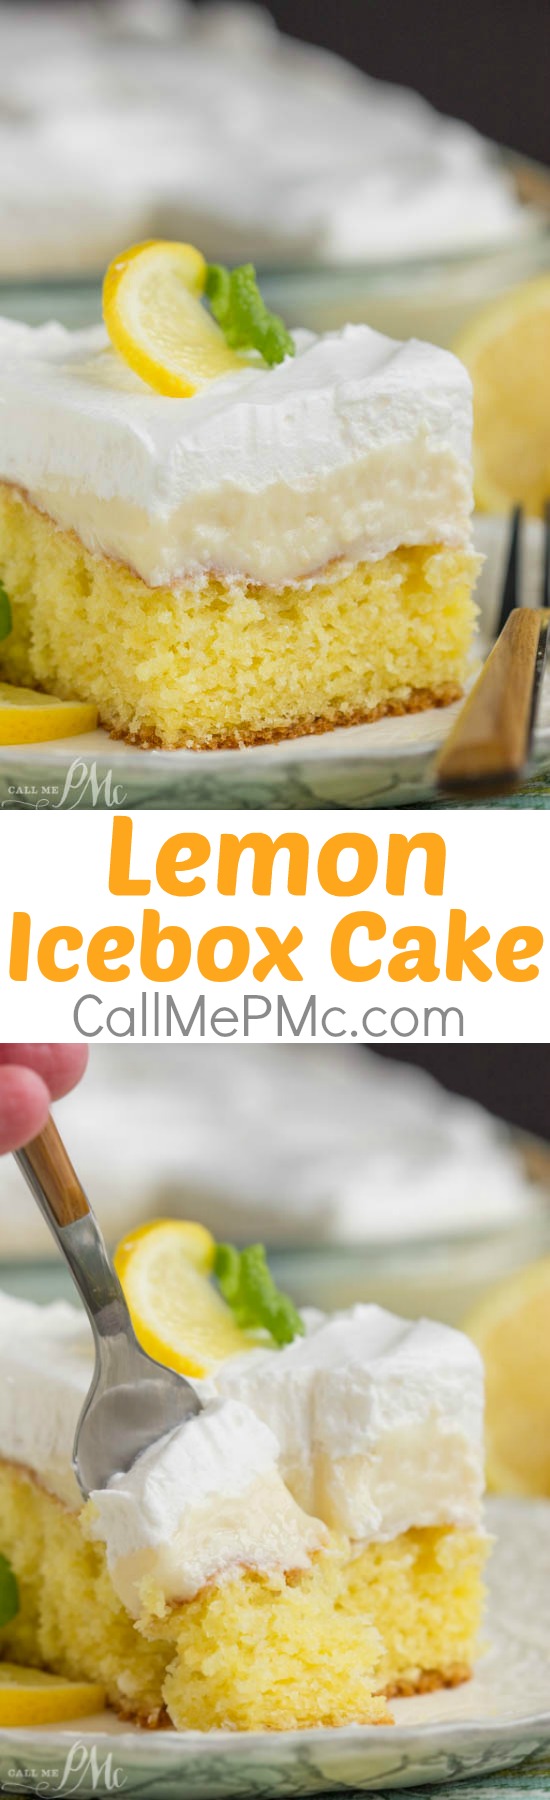 Lemon Icebox Cake was inspired by the classic pie, this silky, refrigerated cake has the popular filling made with lemon juice and sweet condensed milk. It's the perfect marriage of tangy, tart lemon filling and buttery cake and crowned with fluffy whipped cream.